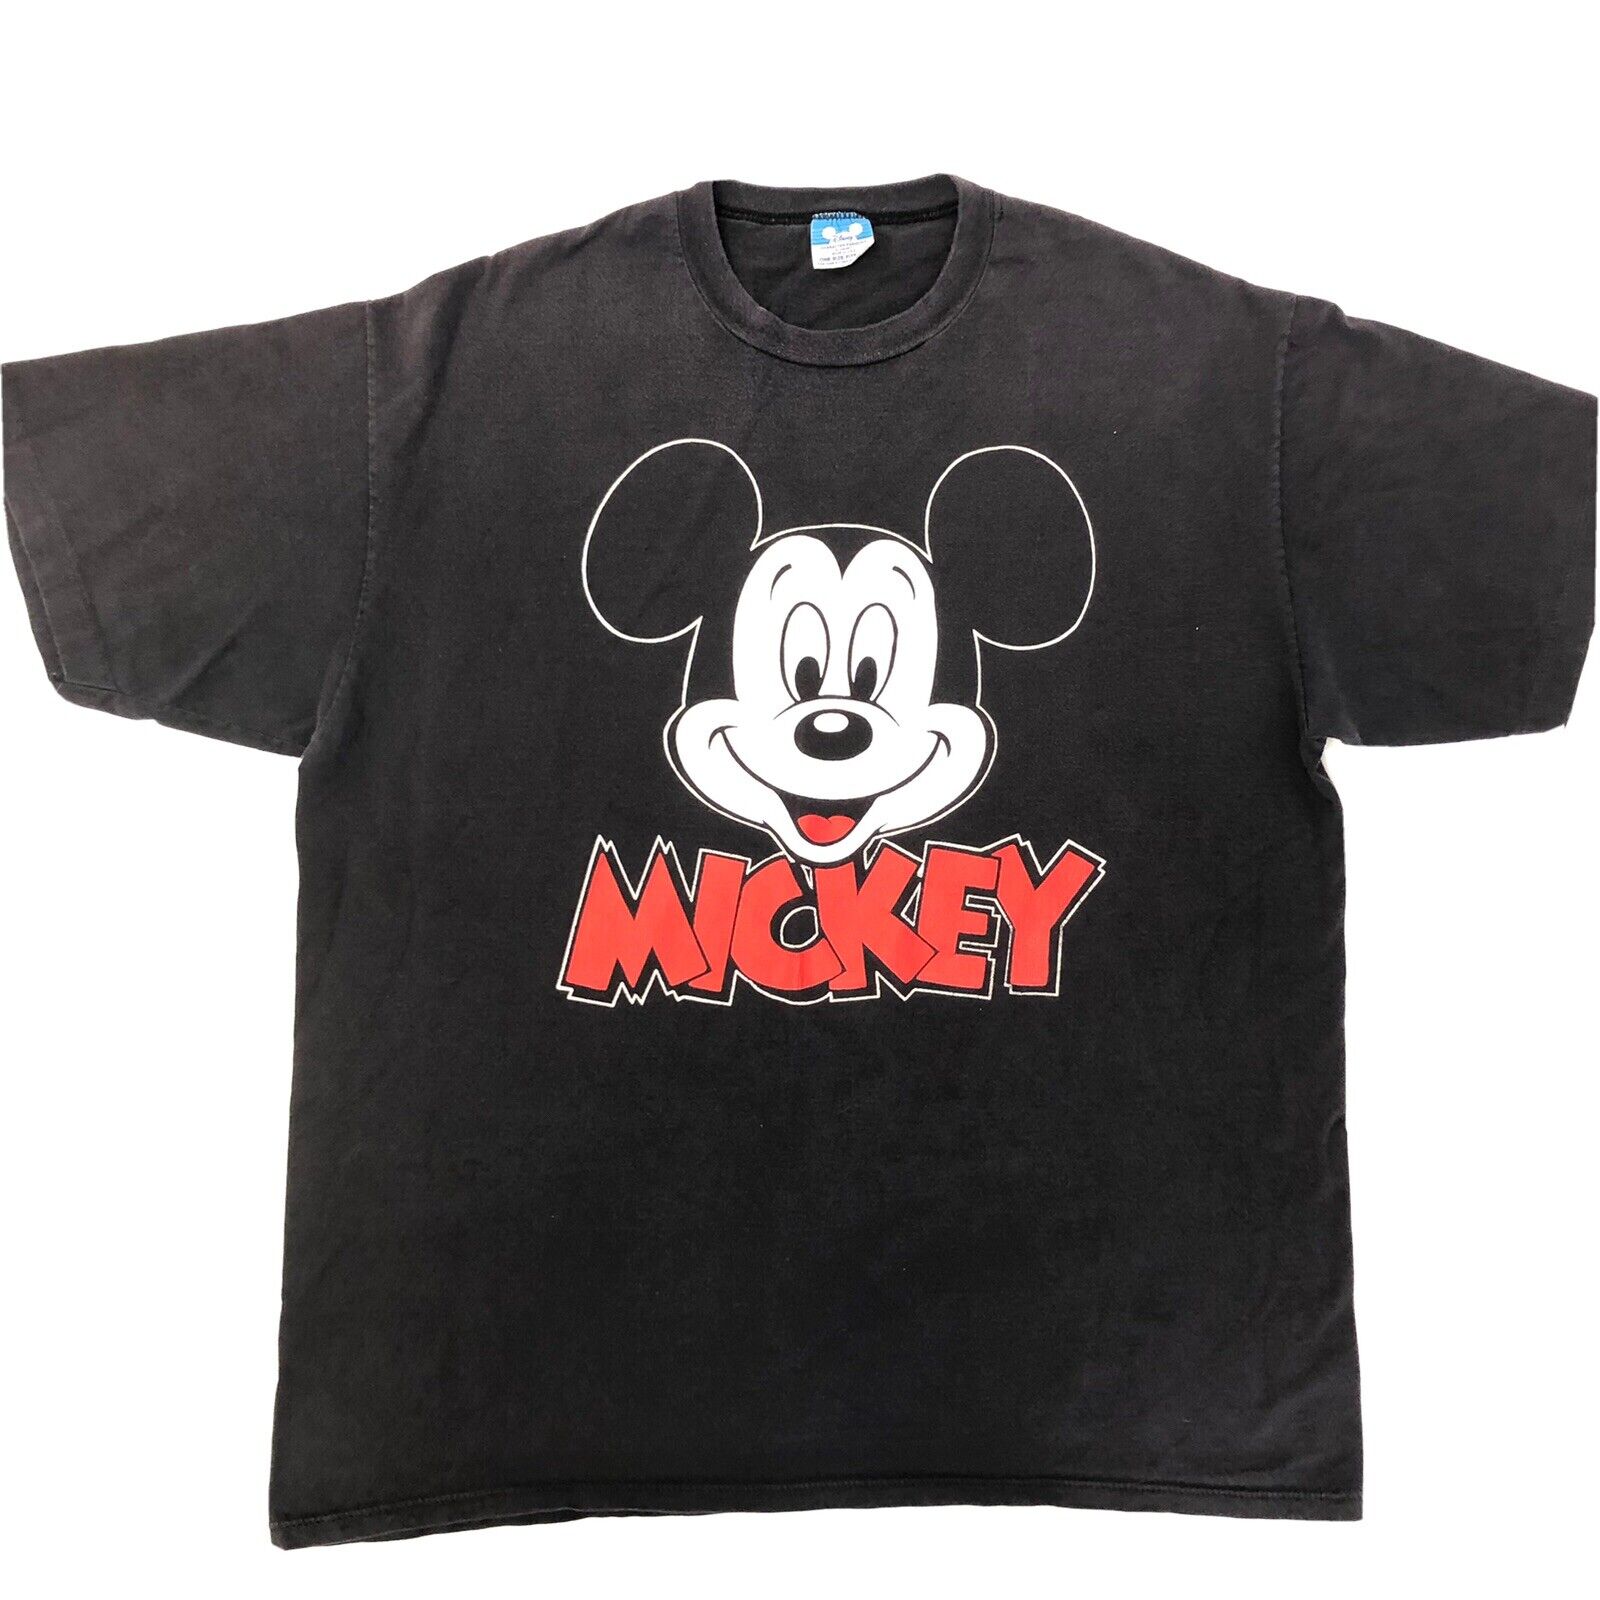 Vtg 80\'s Disney Made in USA Black SPELLOUT Classic Mickey Mouse Graphic T Shirt